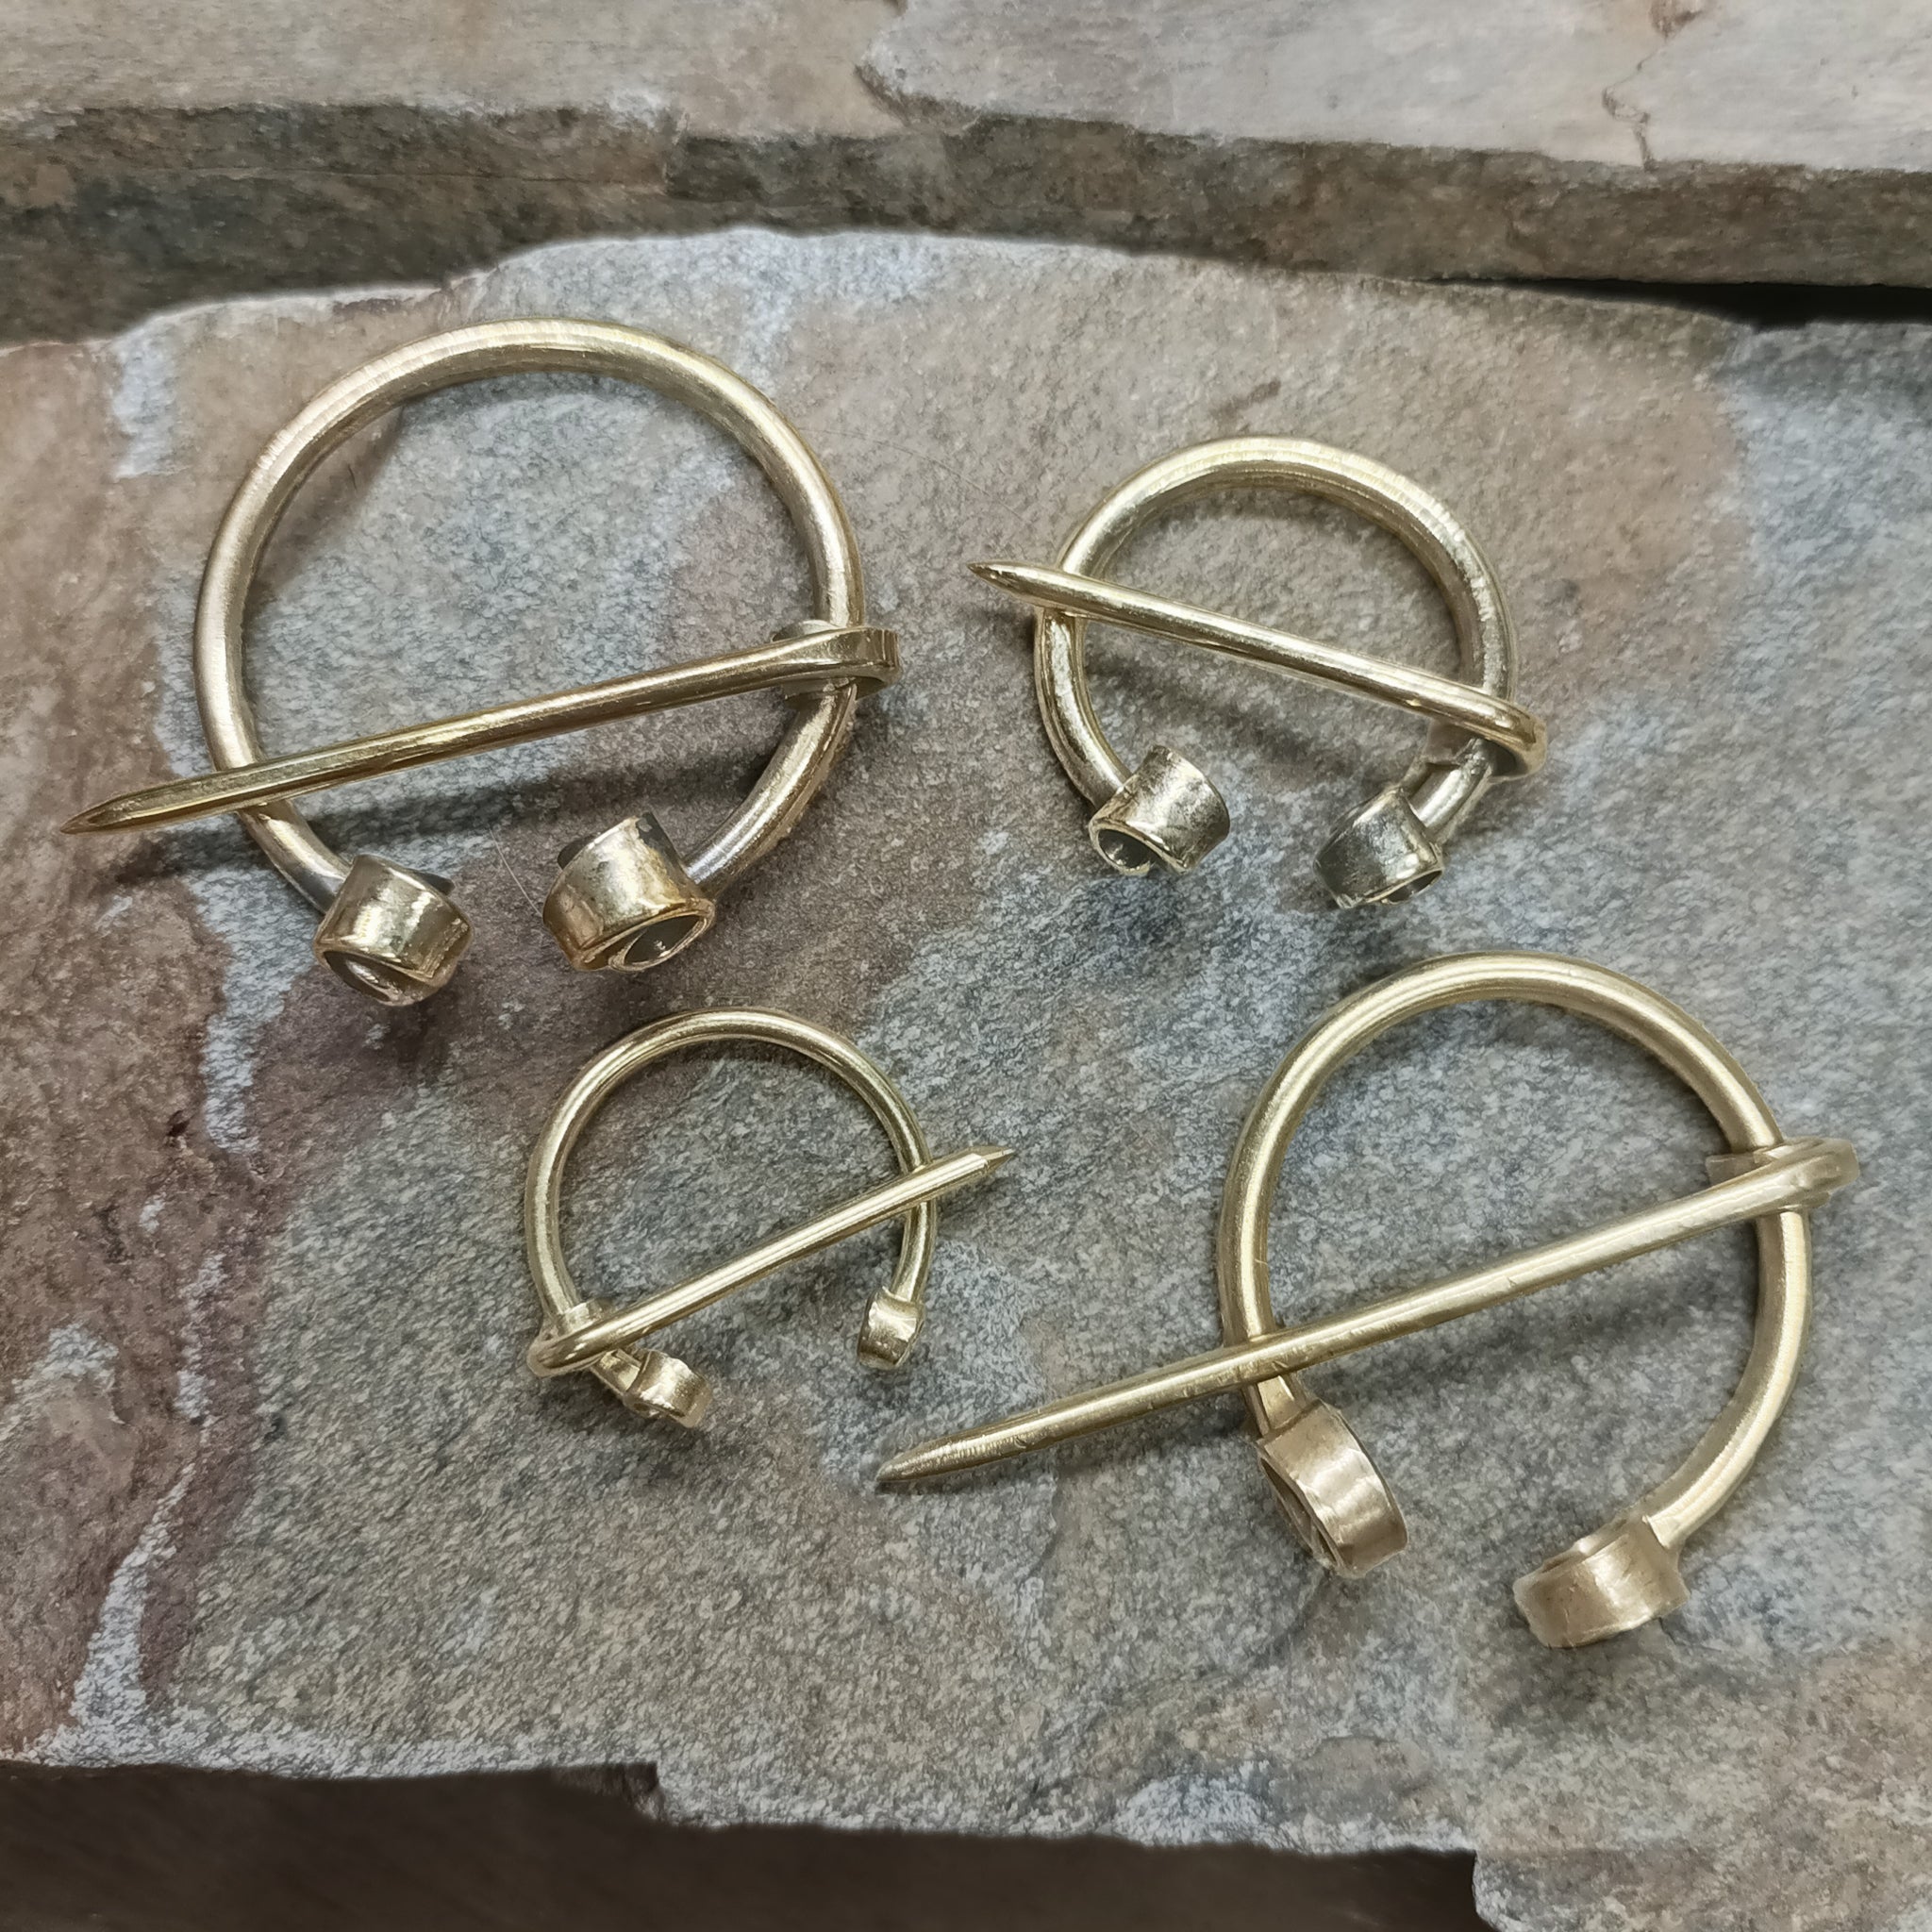 Brass Cloak Pins / Clothes Pins on Rock - 4 Sizes